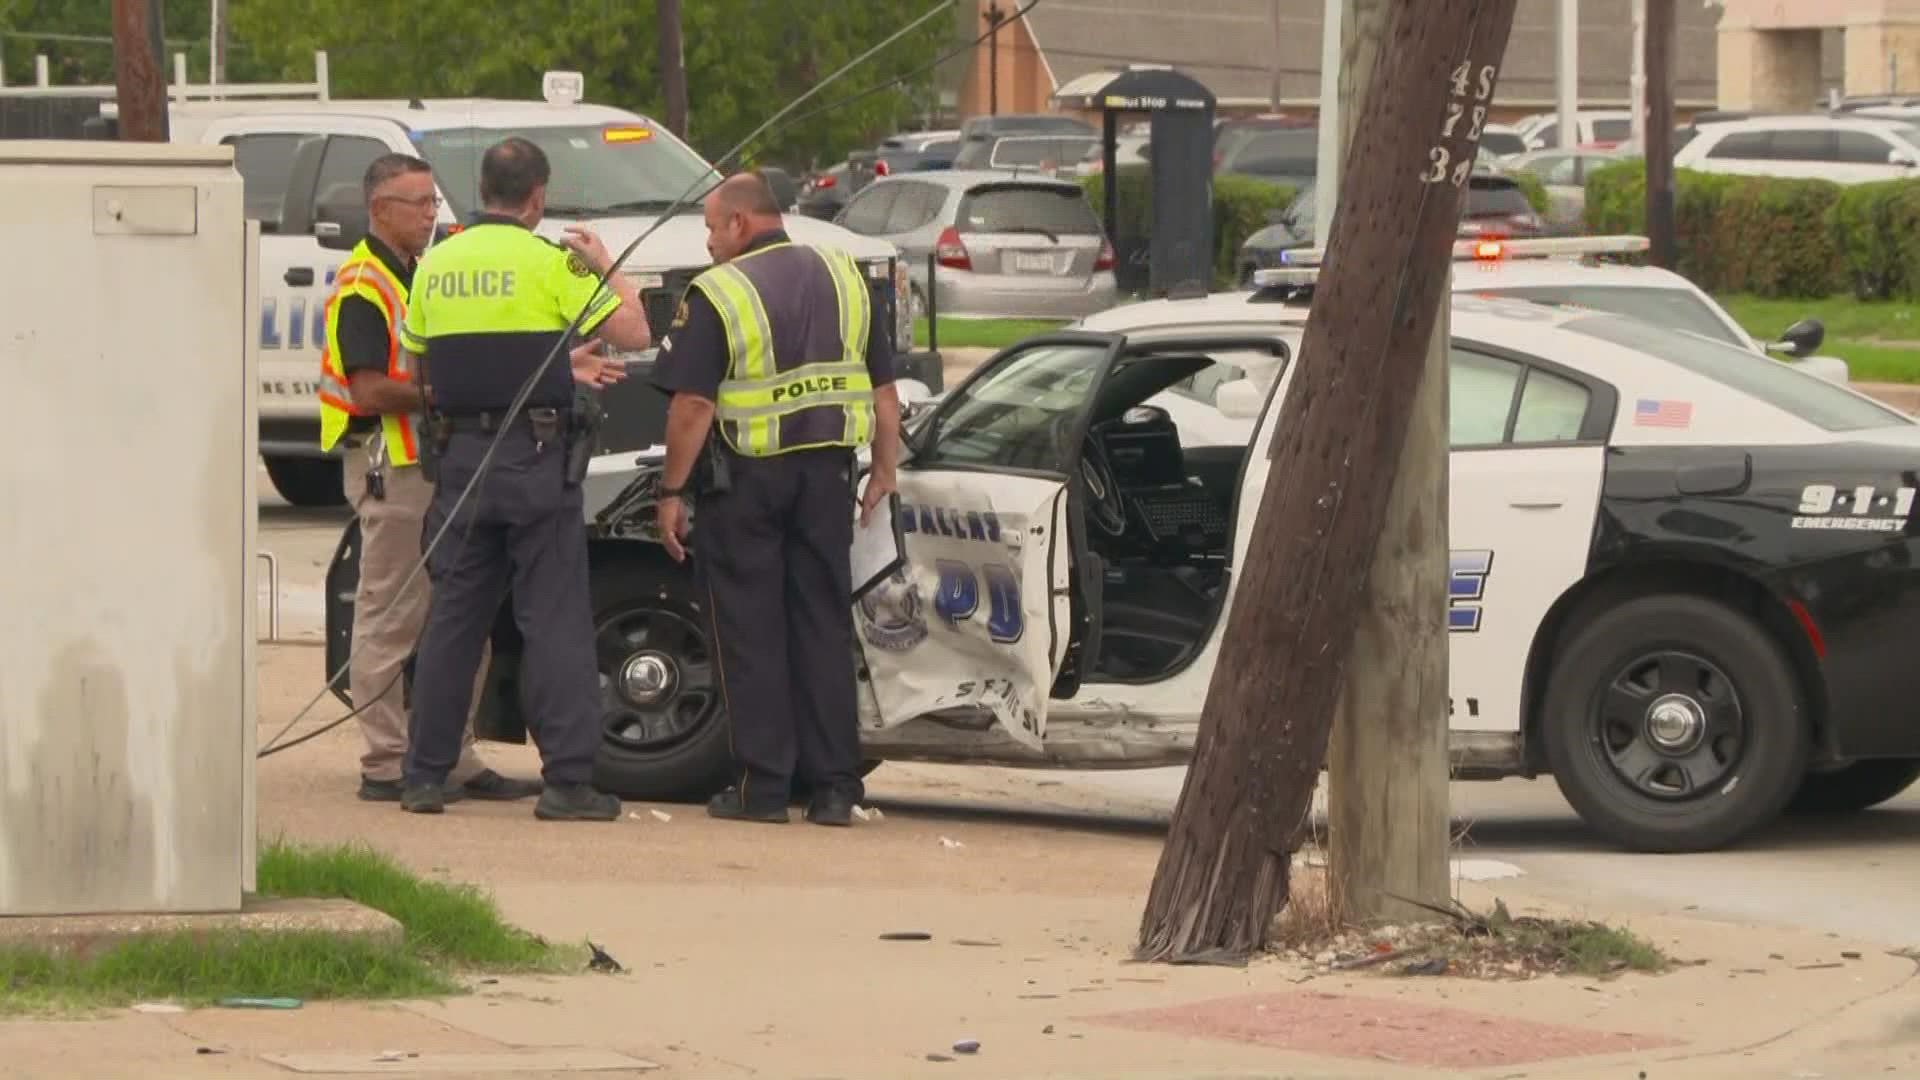 The officer's injuries do not appear to be life-threatening, DPD said.